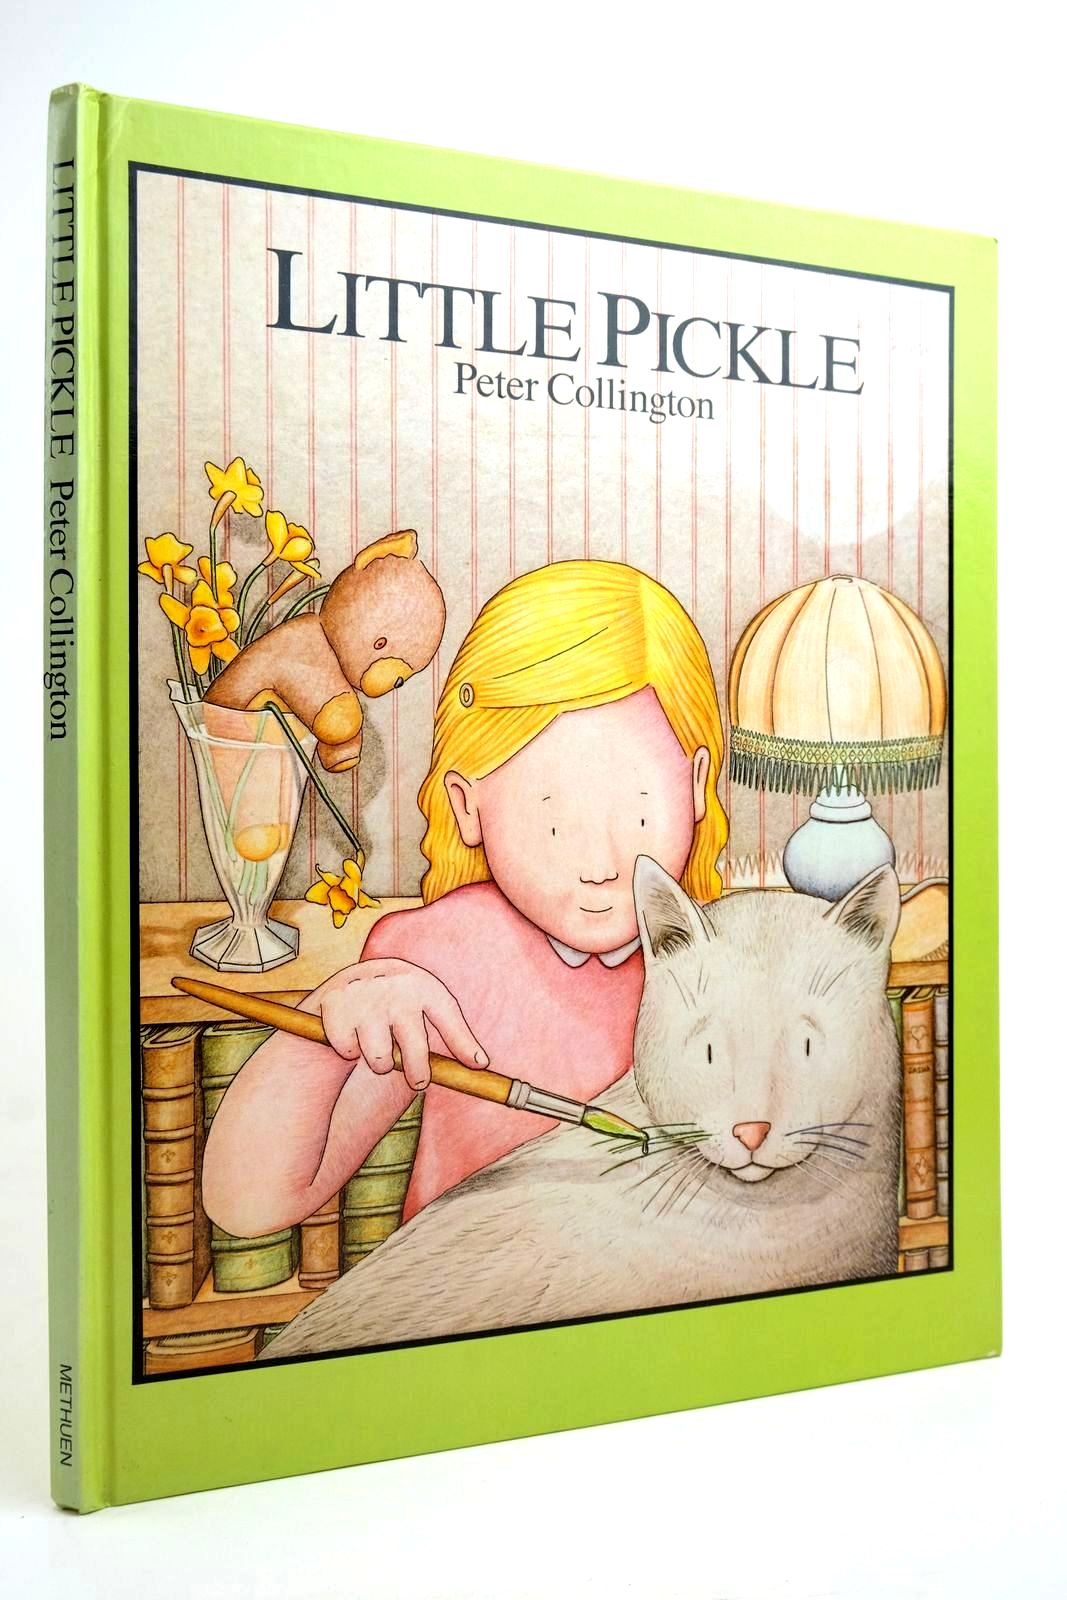 Photo of LITTLE PICKLE written by Collington, Peter illustrated by Collington, Peter published by Methuen Children's Books (STOCK CODE: 2135563)  for sale by Stella & Rose's Books